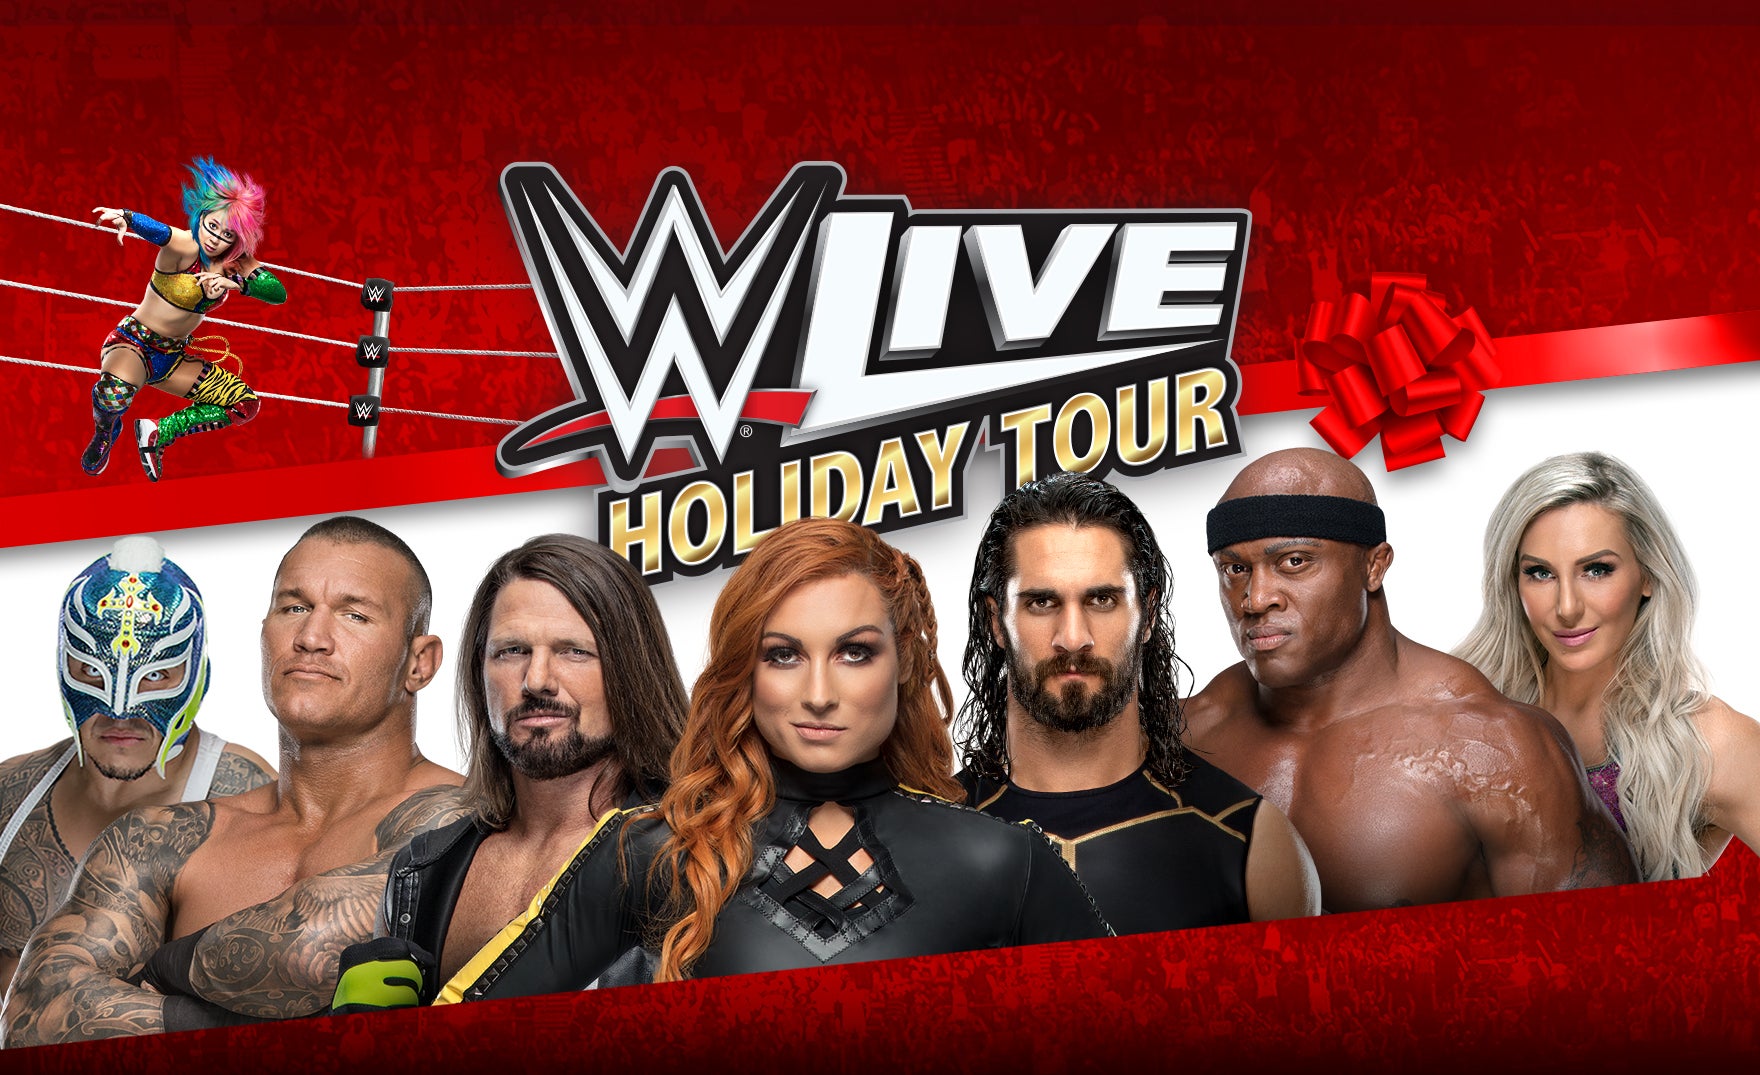 WWE Live Holiday Tour PPG Paints Arena